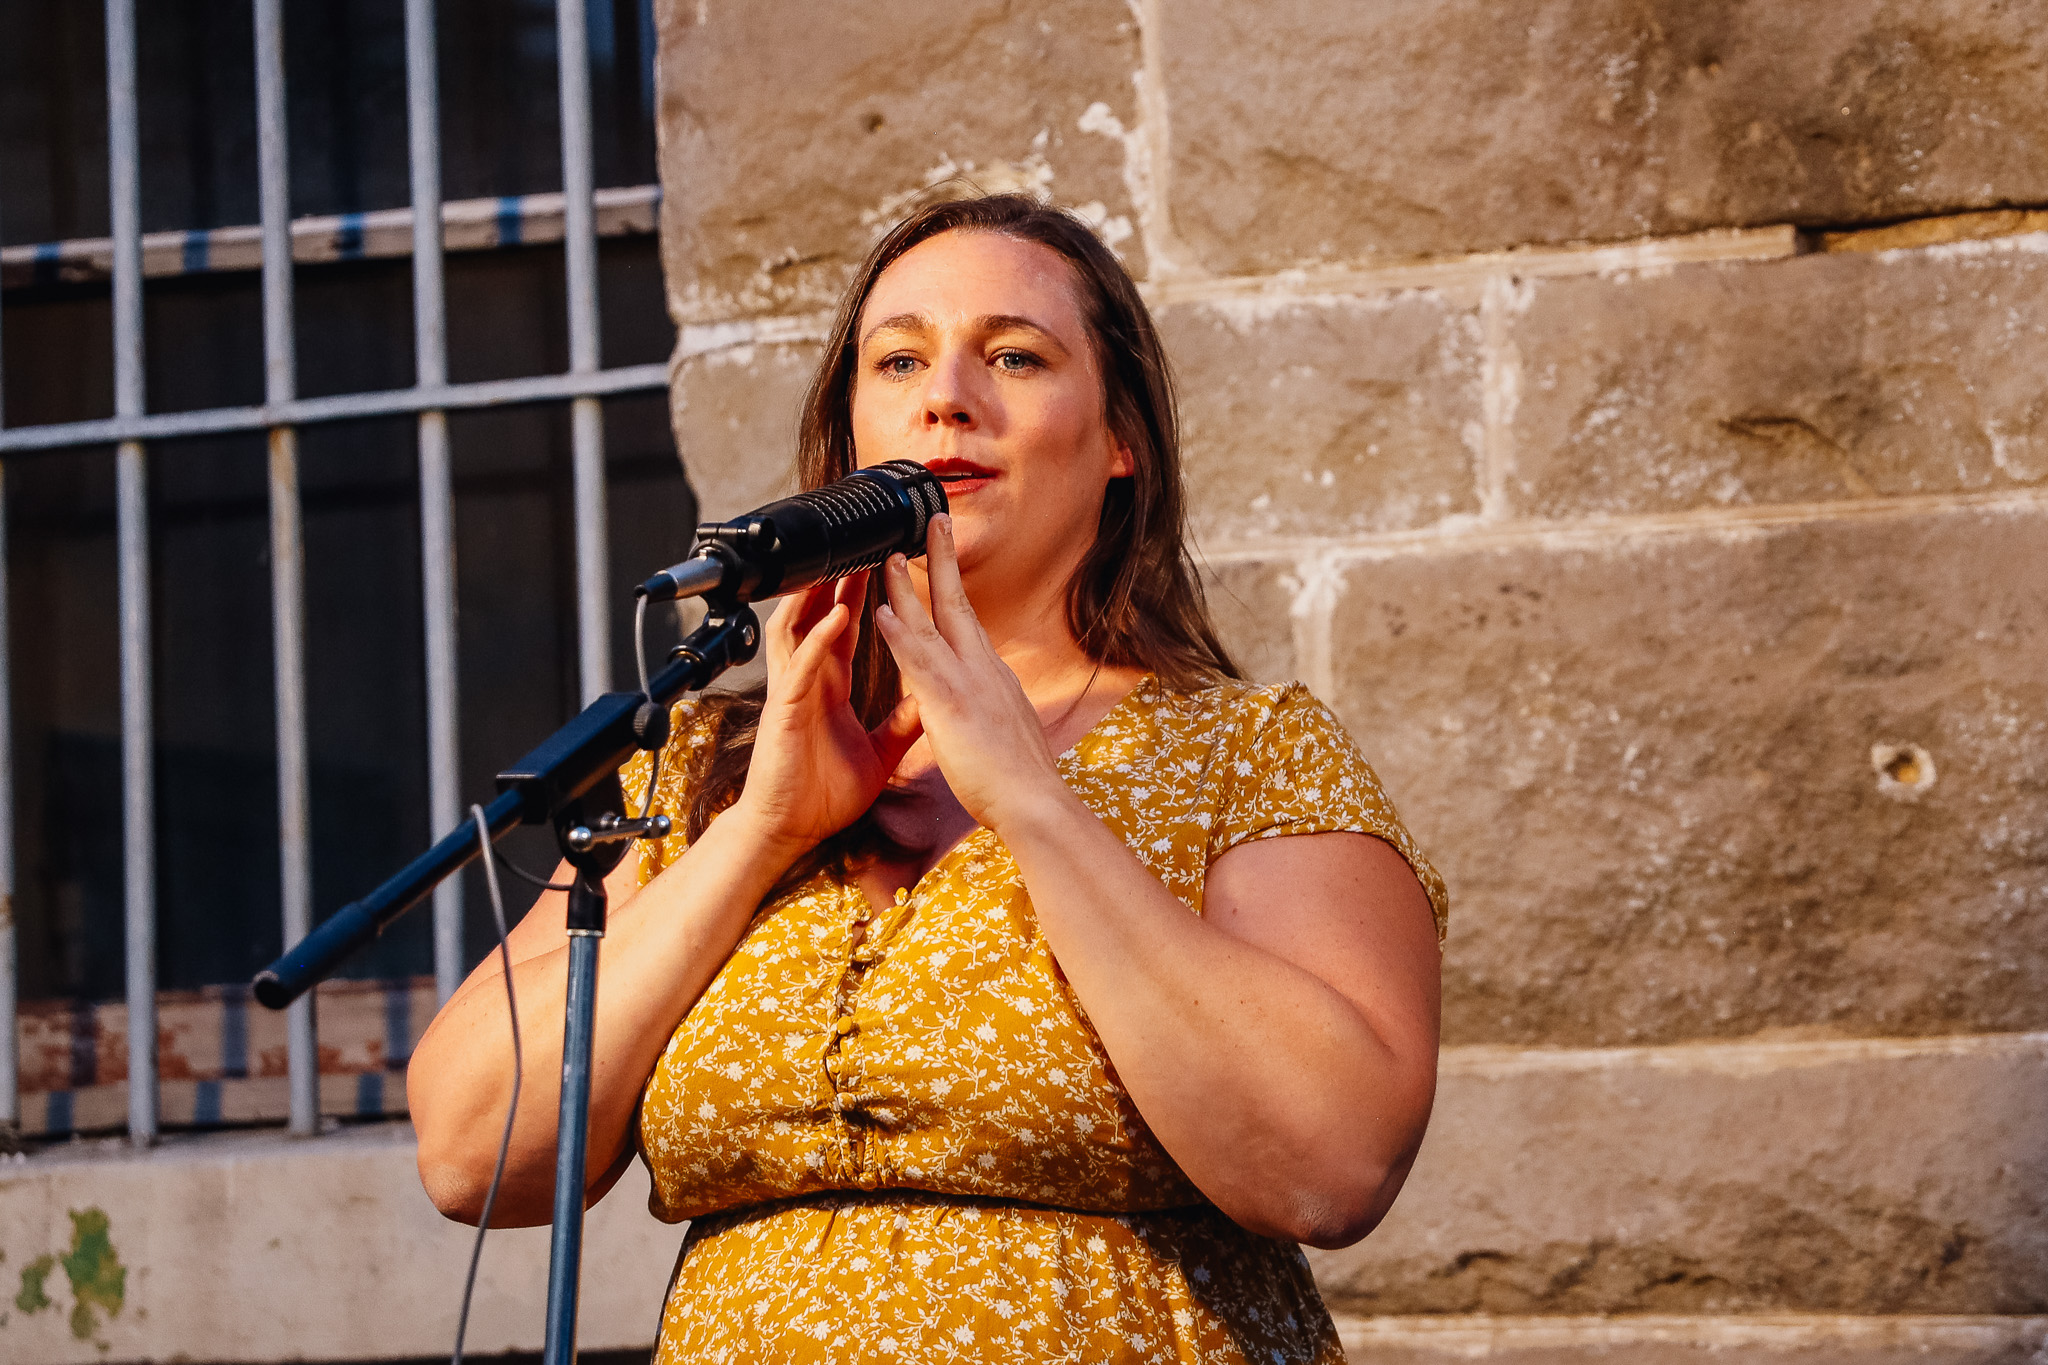 A woman in a yellow dress at a microphone in front of a stone wall and window with bars